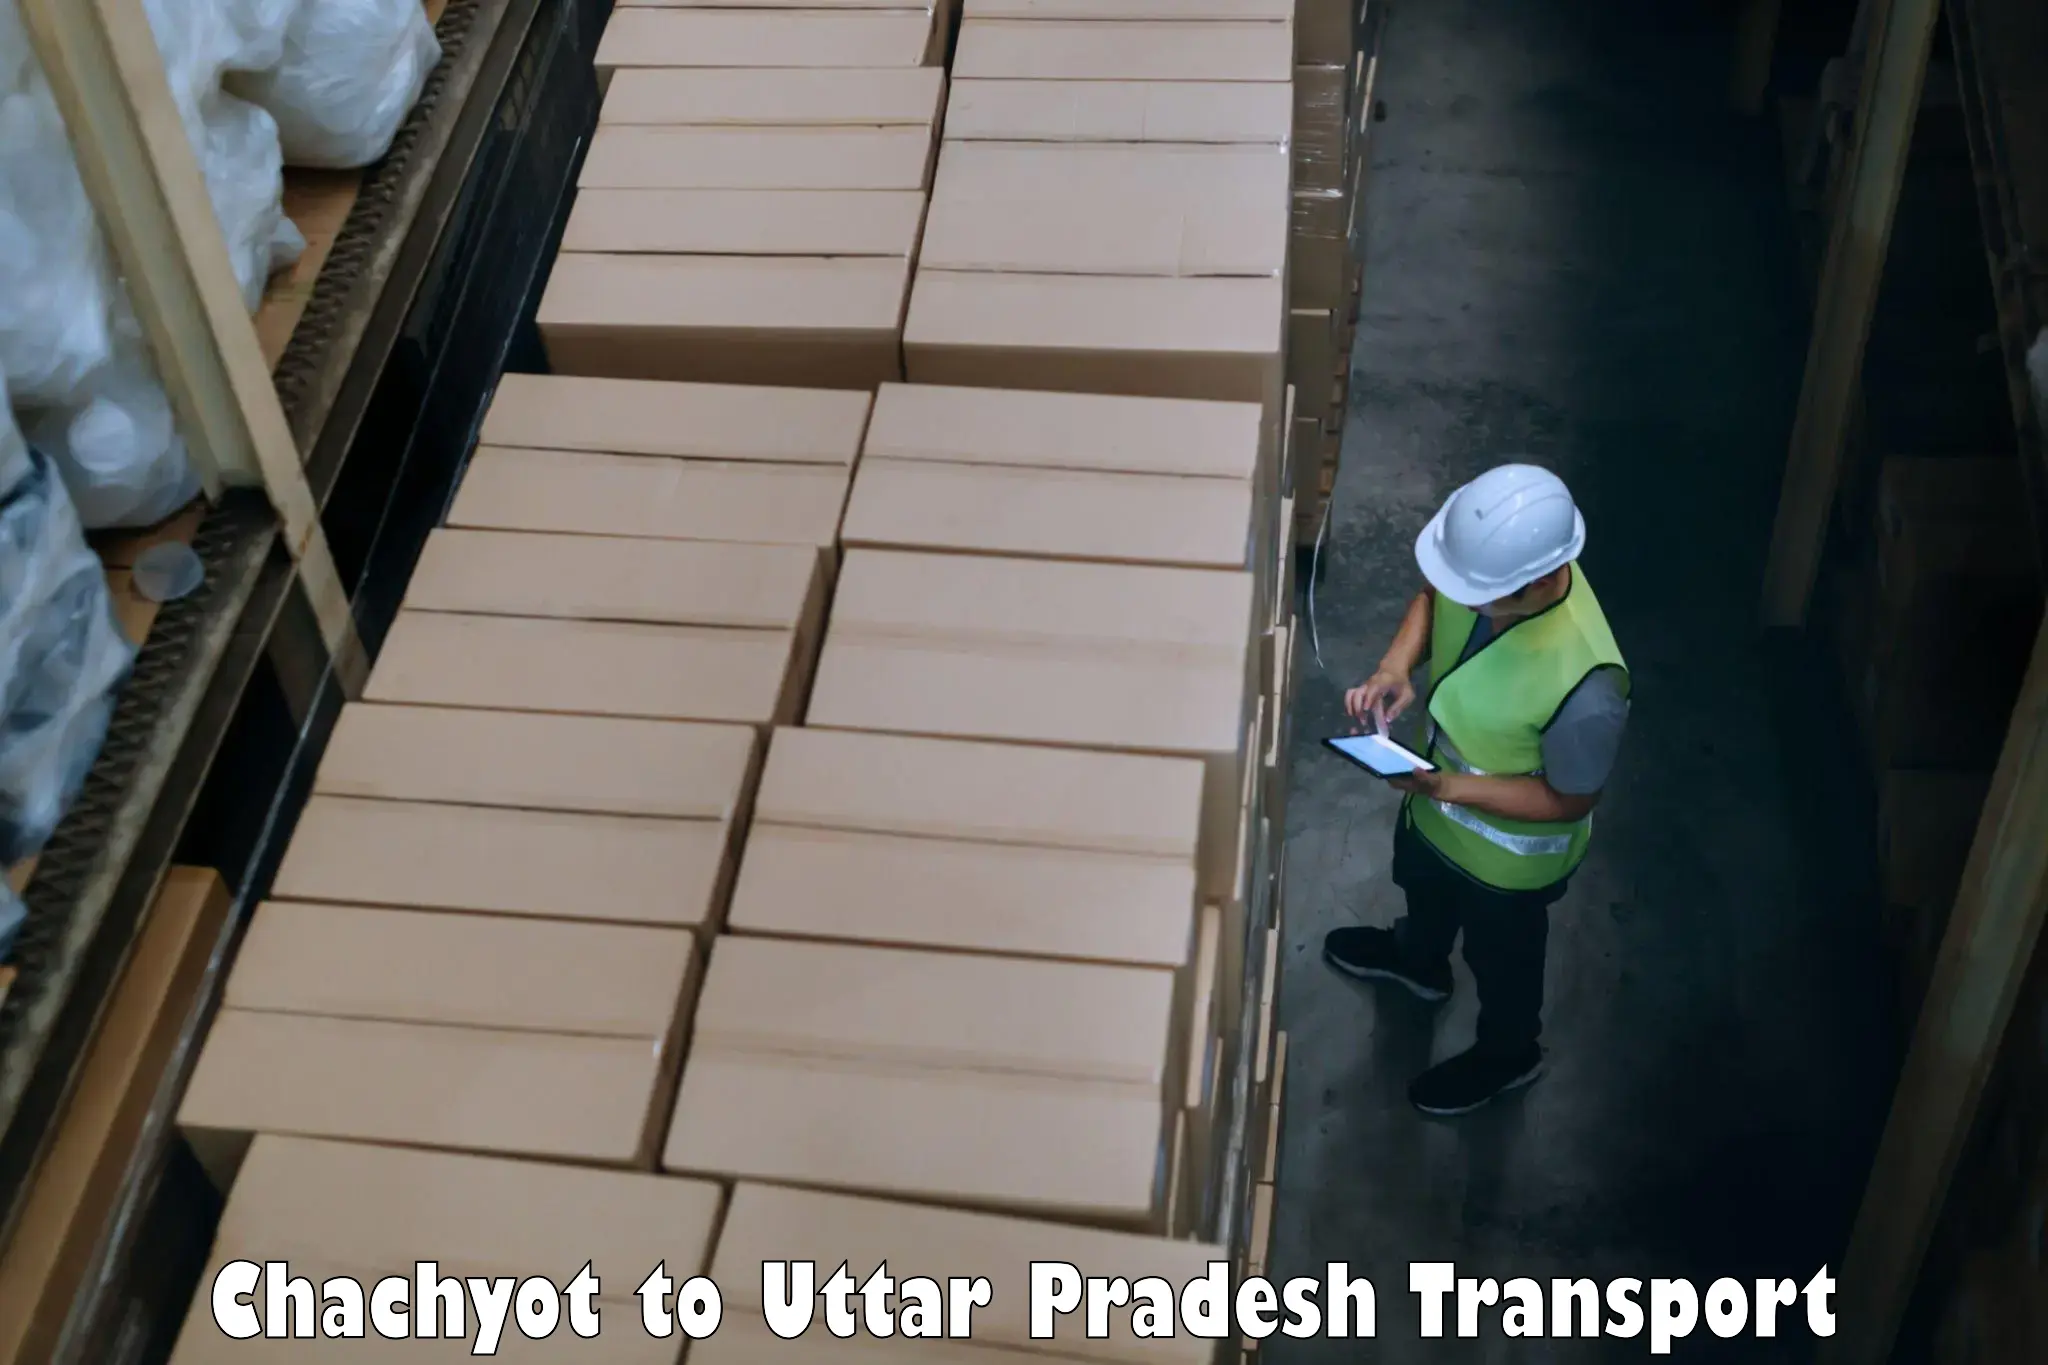 Truck transport companies in India Chachyot to Konch